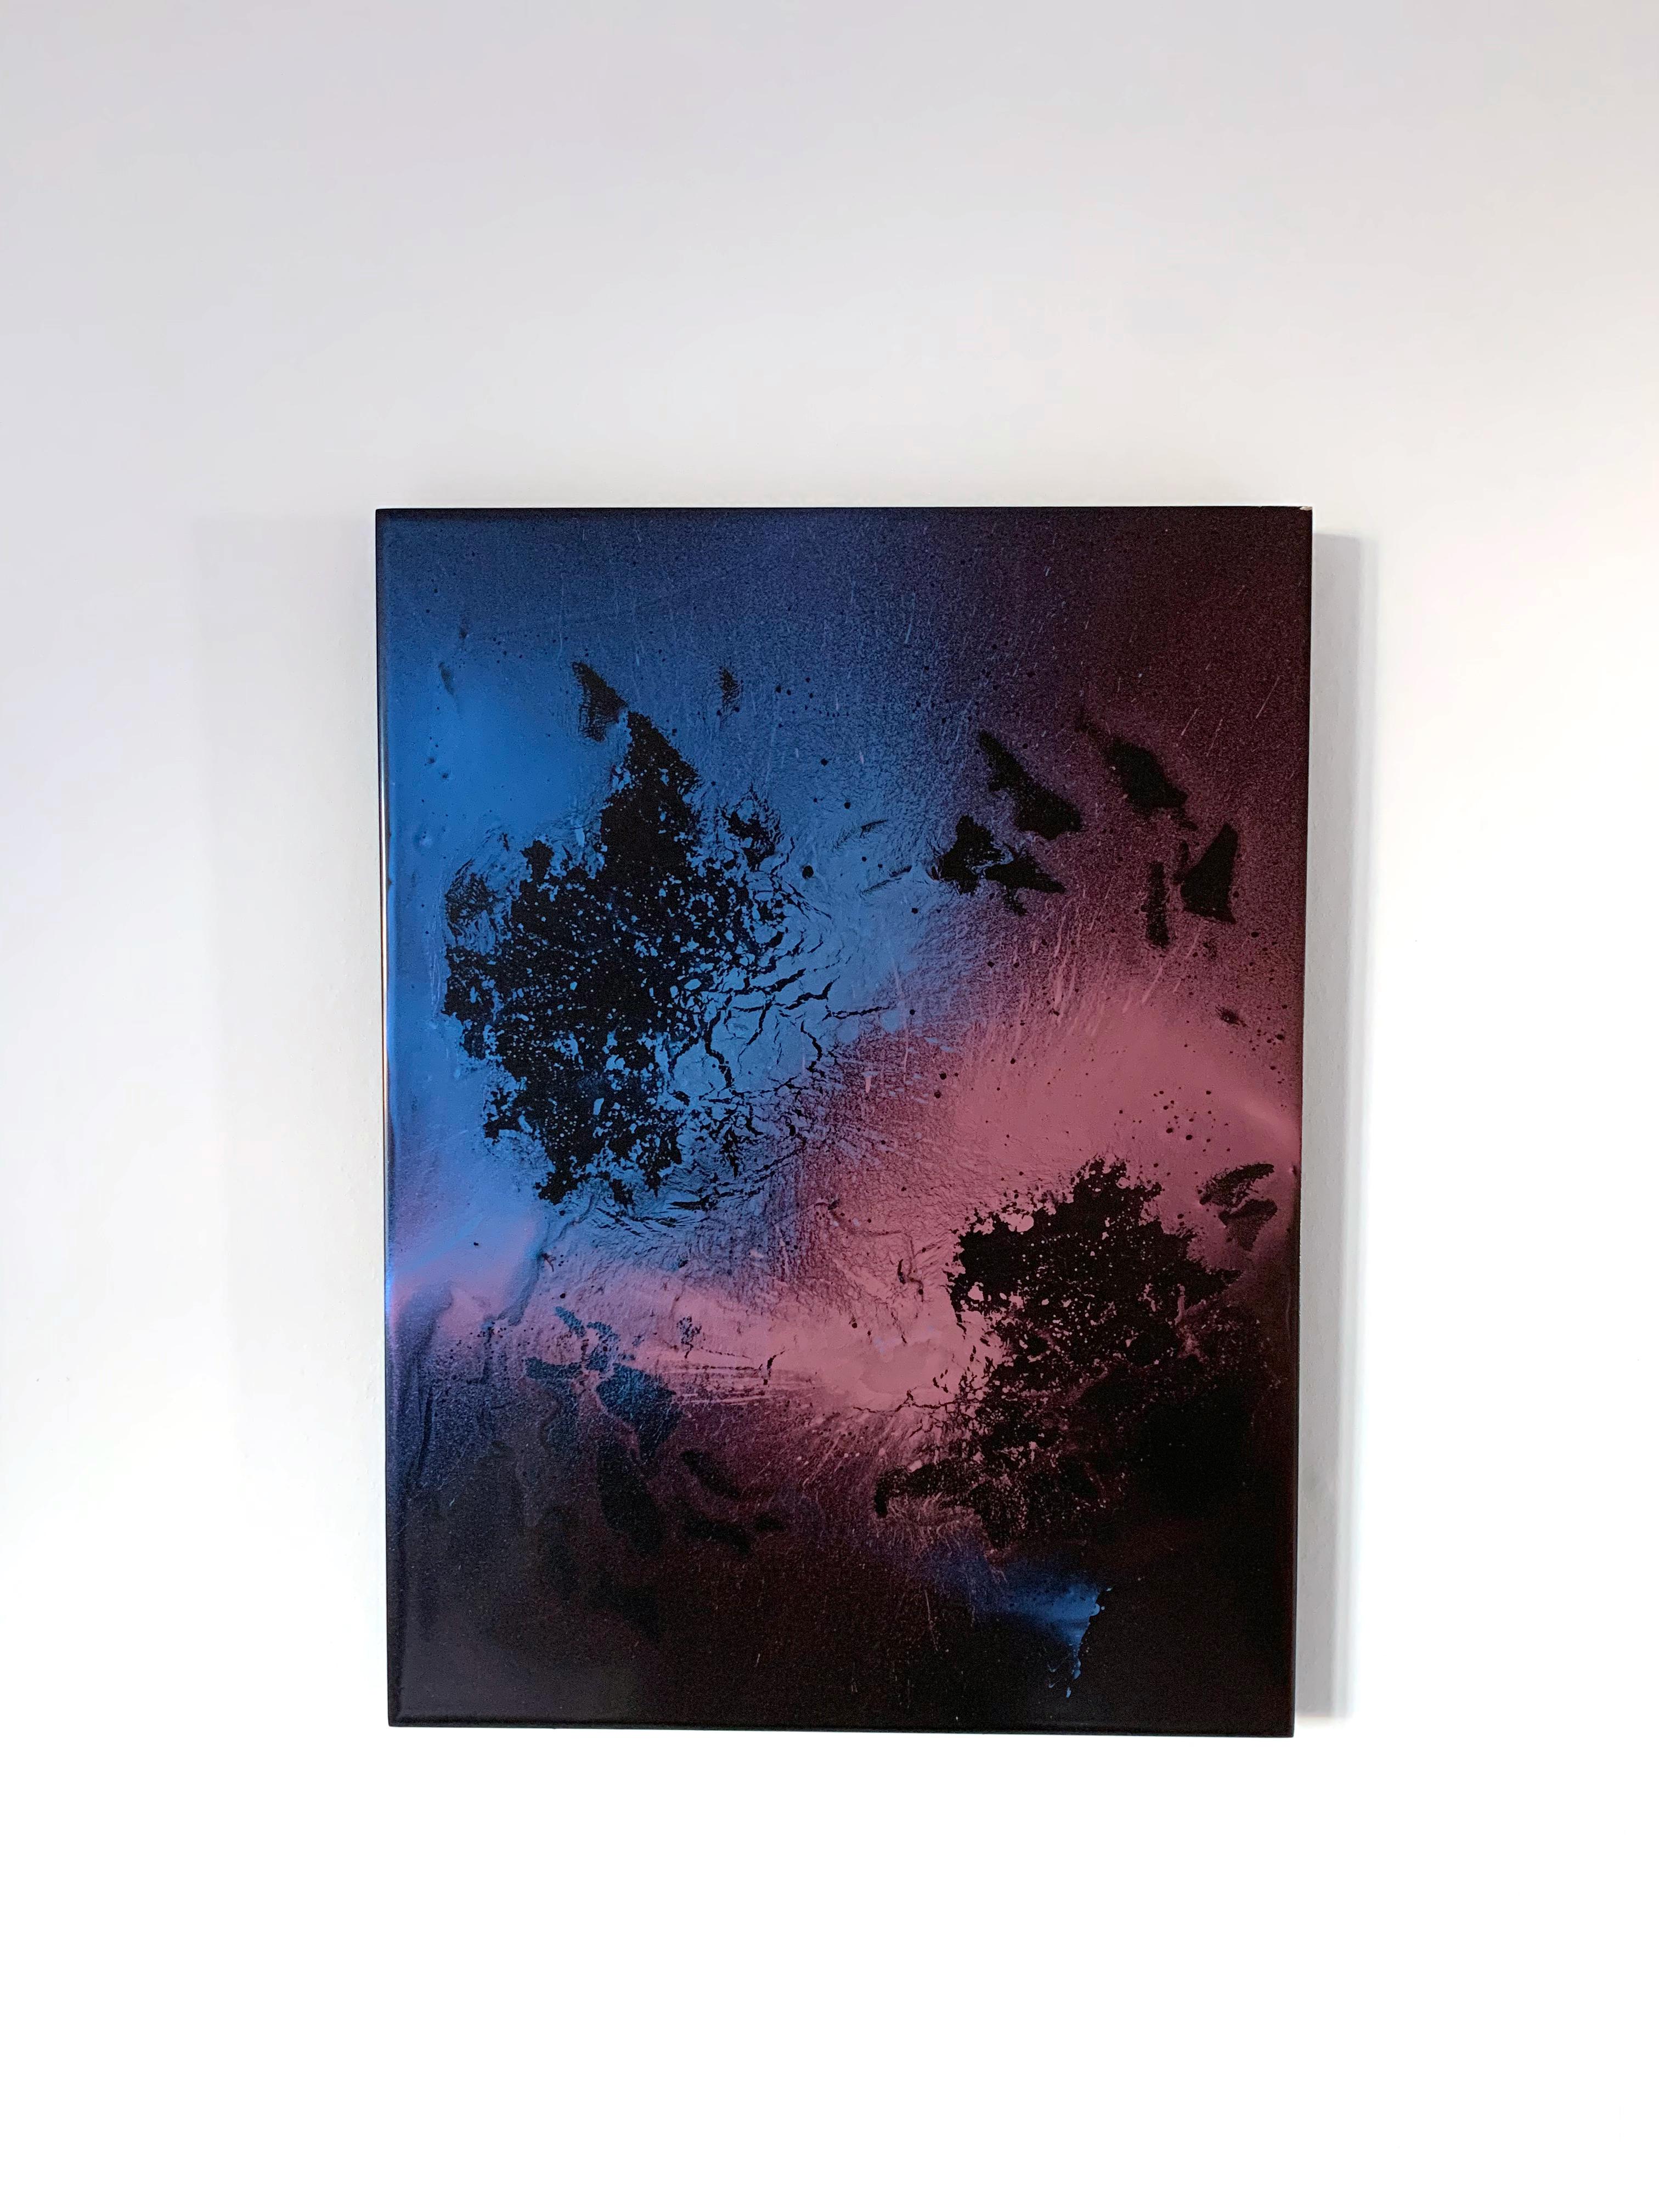 Taking its inspiration from street art and the use of new paint media, Michael Graham creates abstract worlds using metallic paint and Mica.  Painted on board, these paintings shimmer and colours change as you move around them. 

Michael Graham is